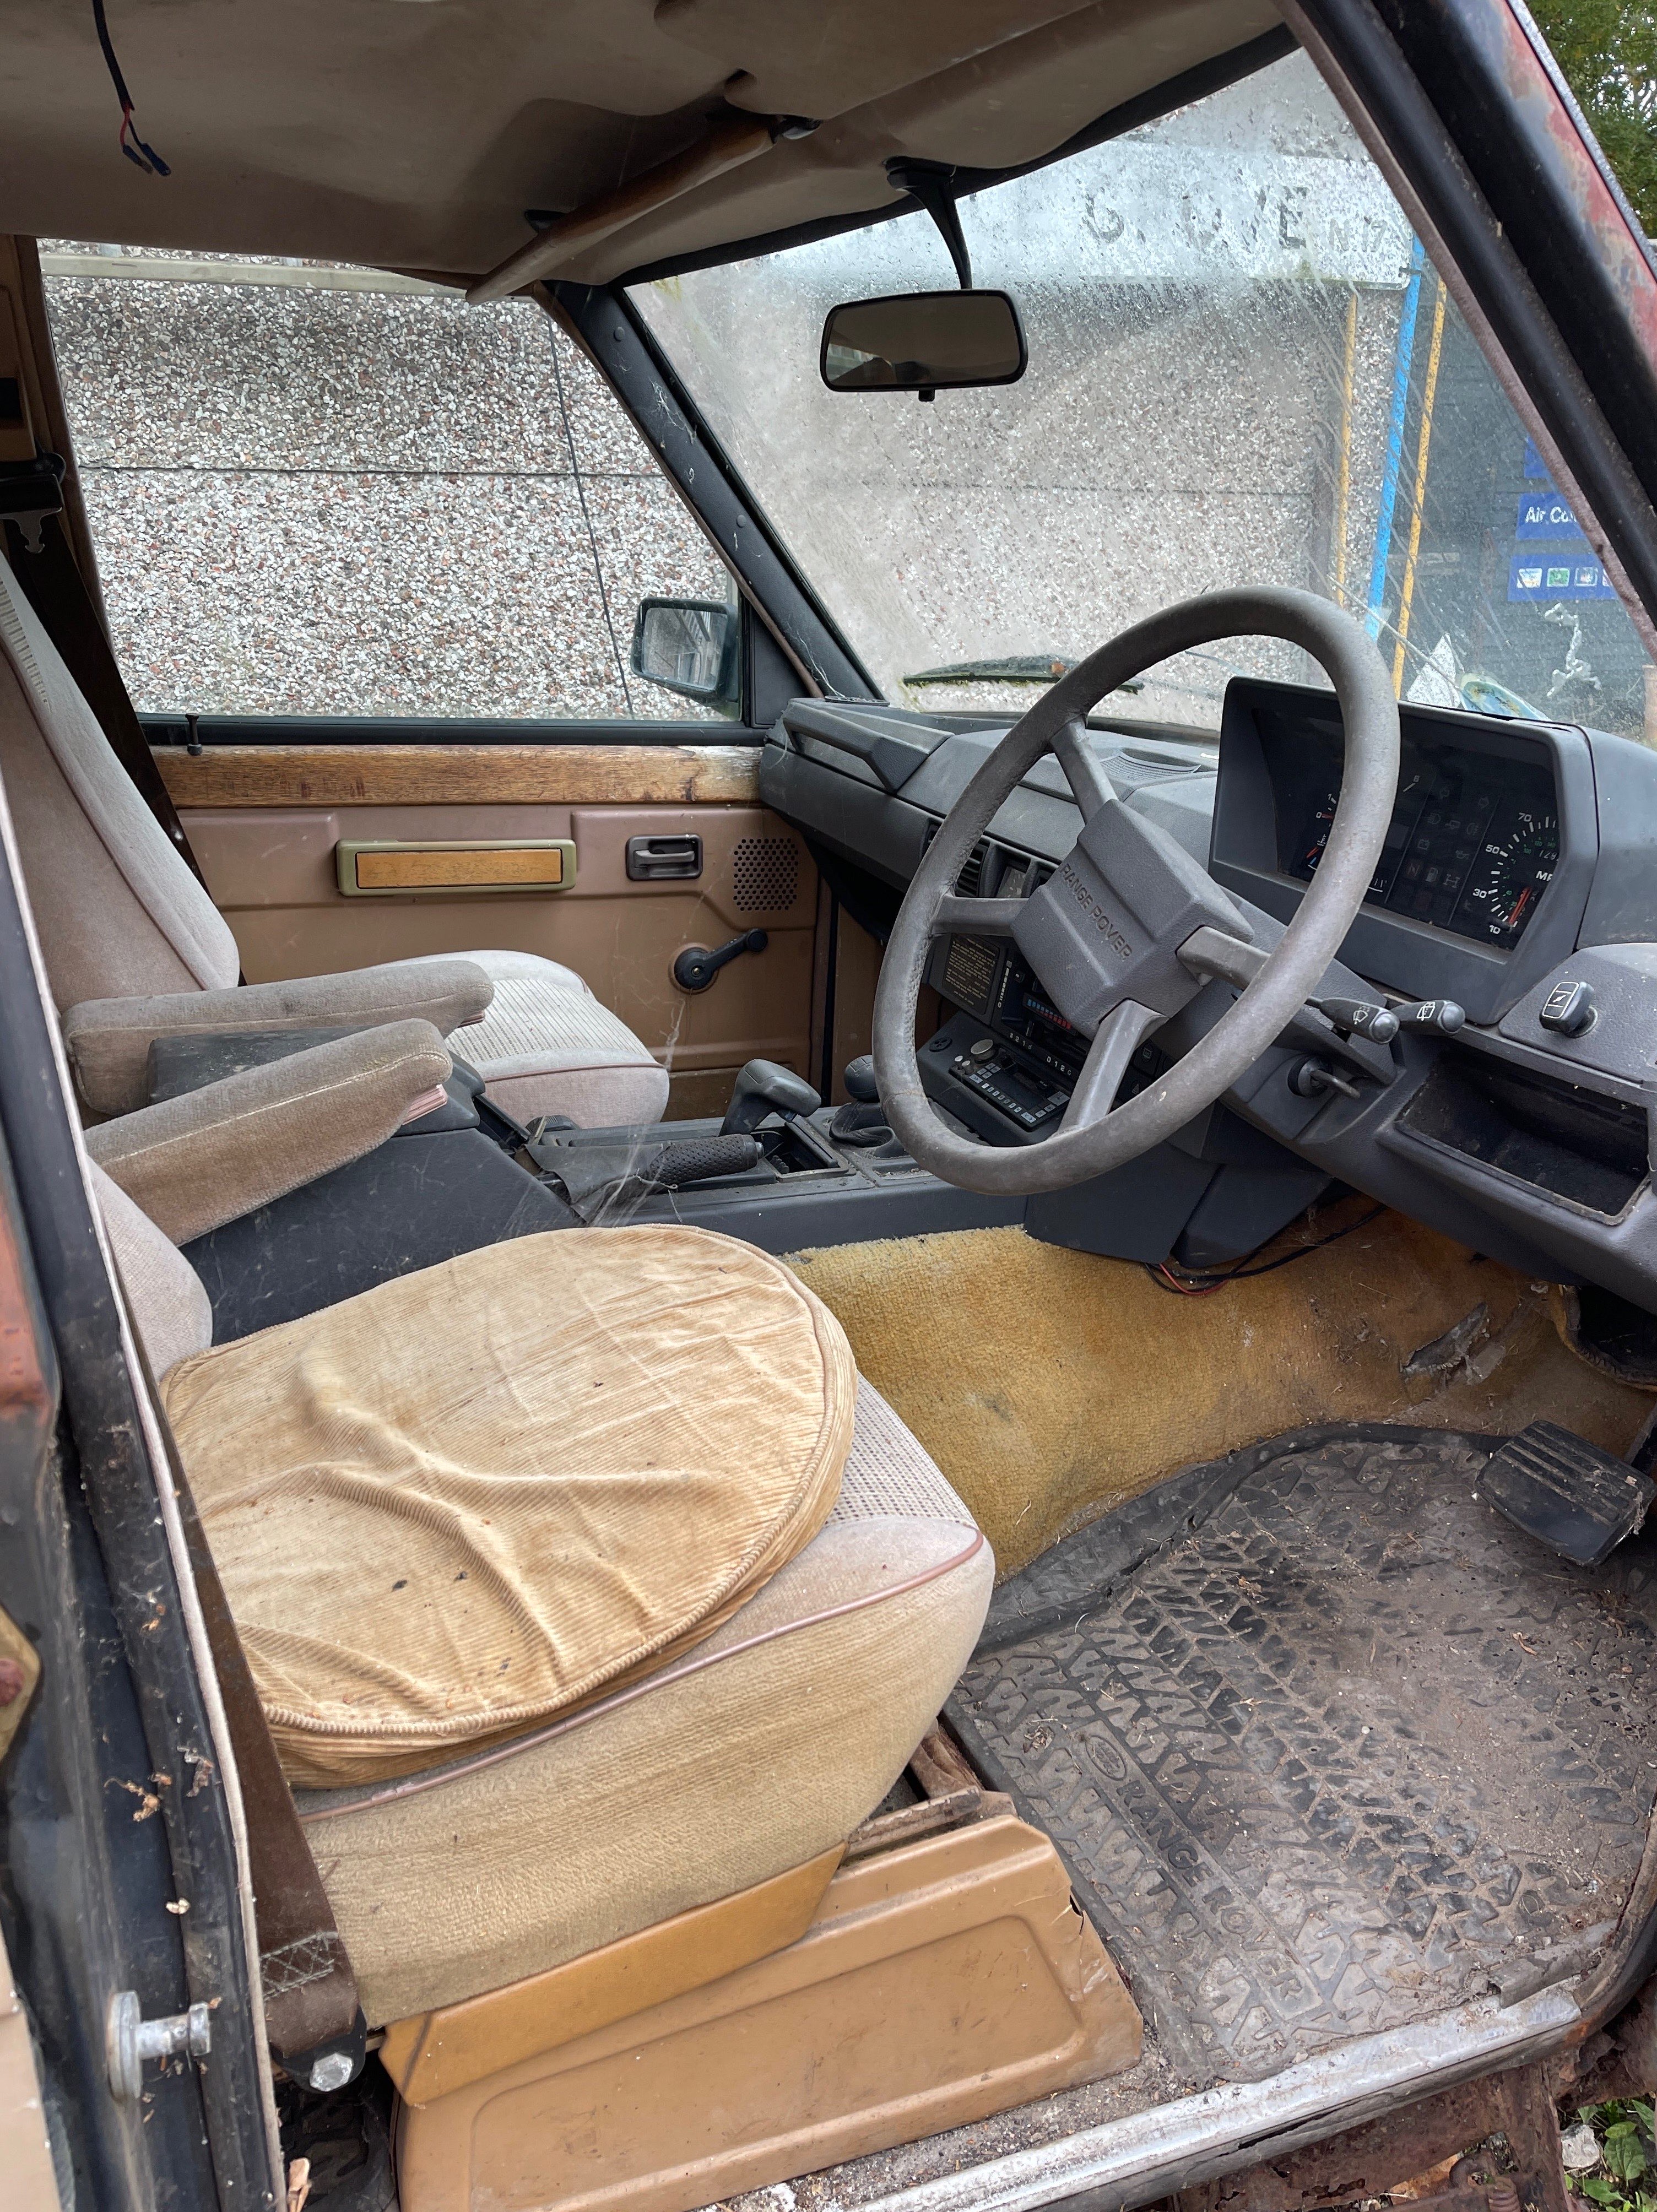 A vintage 2.5 diesel Range Rover with 129,200 miles on the clock. - Image 3 of 3